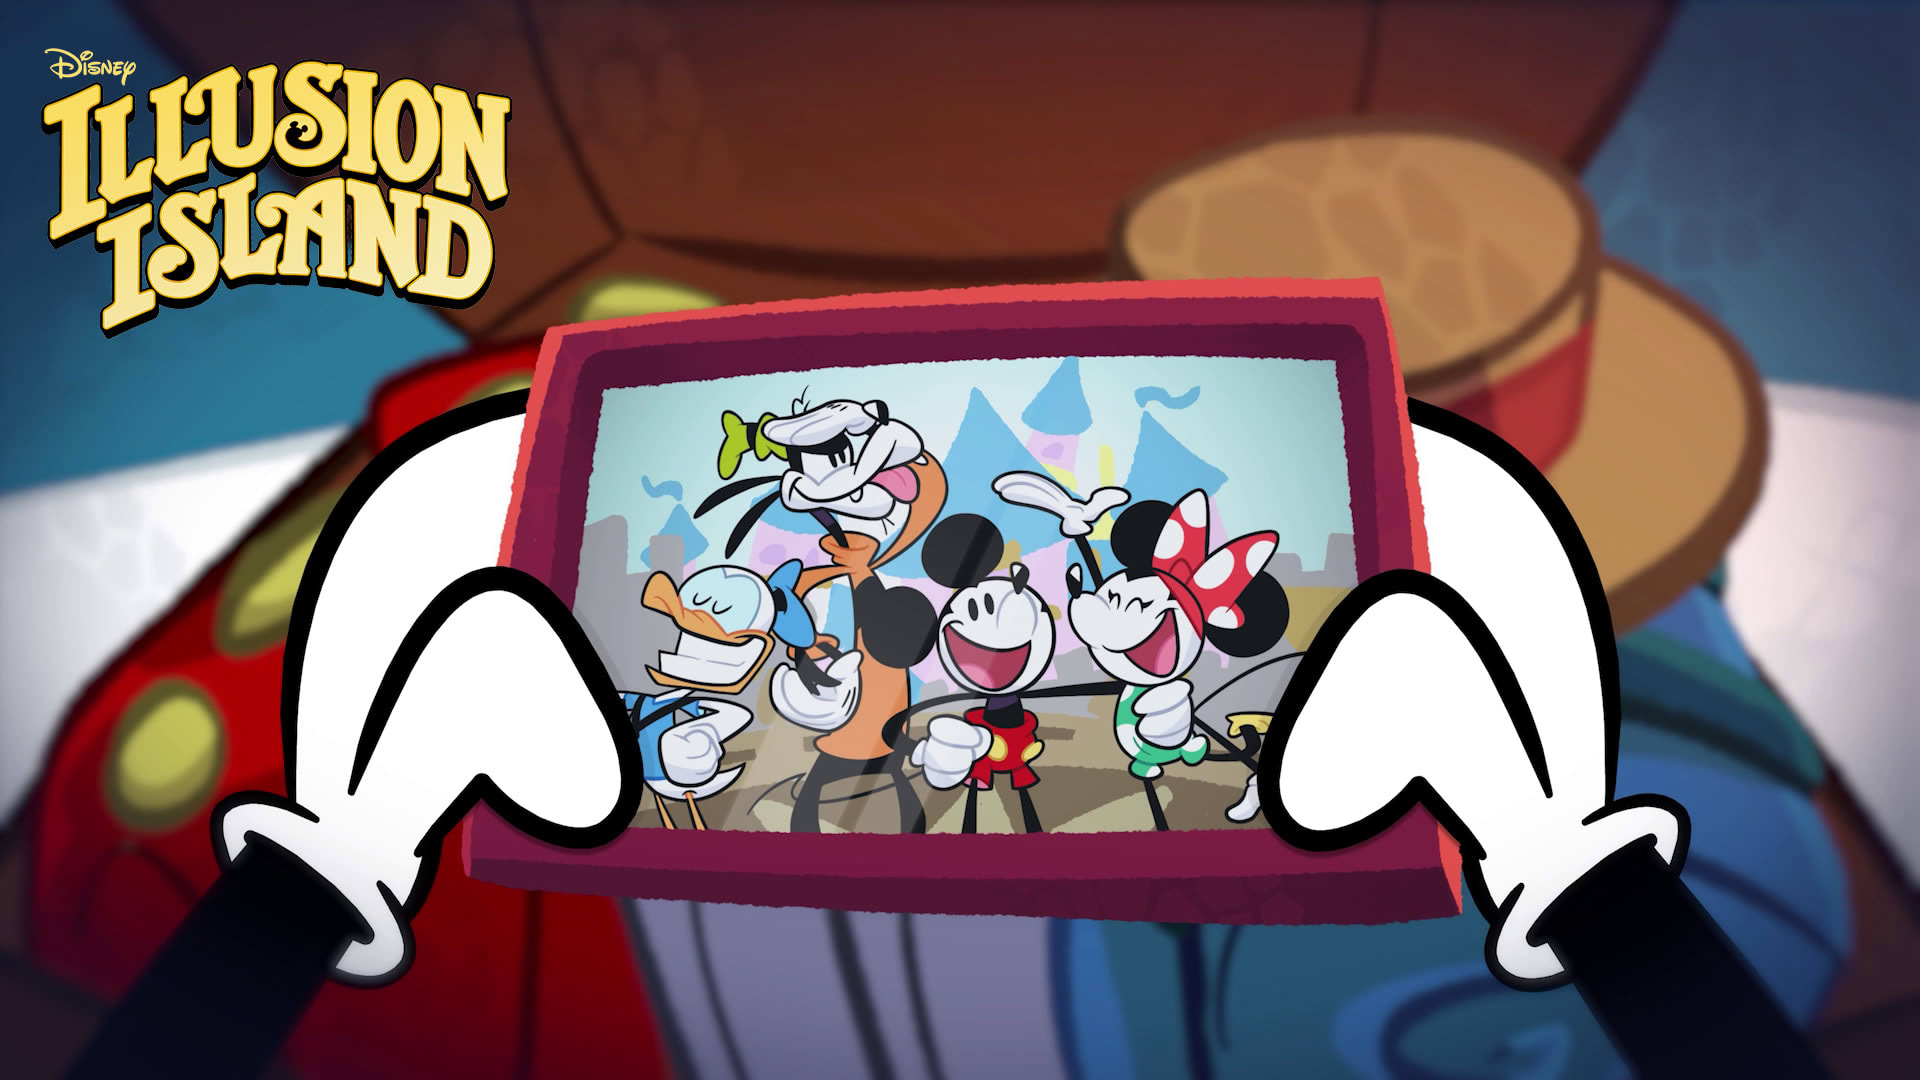 Disney Illusion Island: Join Mickey & Friends in a high-flying platforming adventure for up to four players! Hero